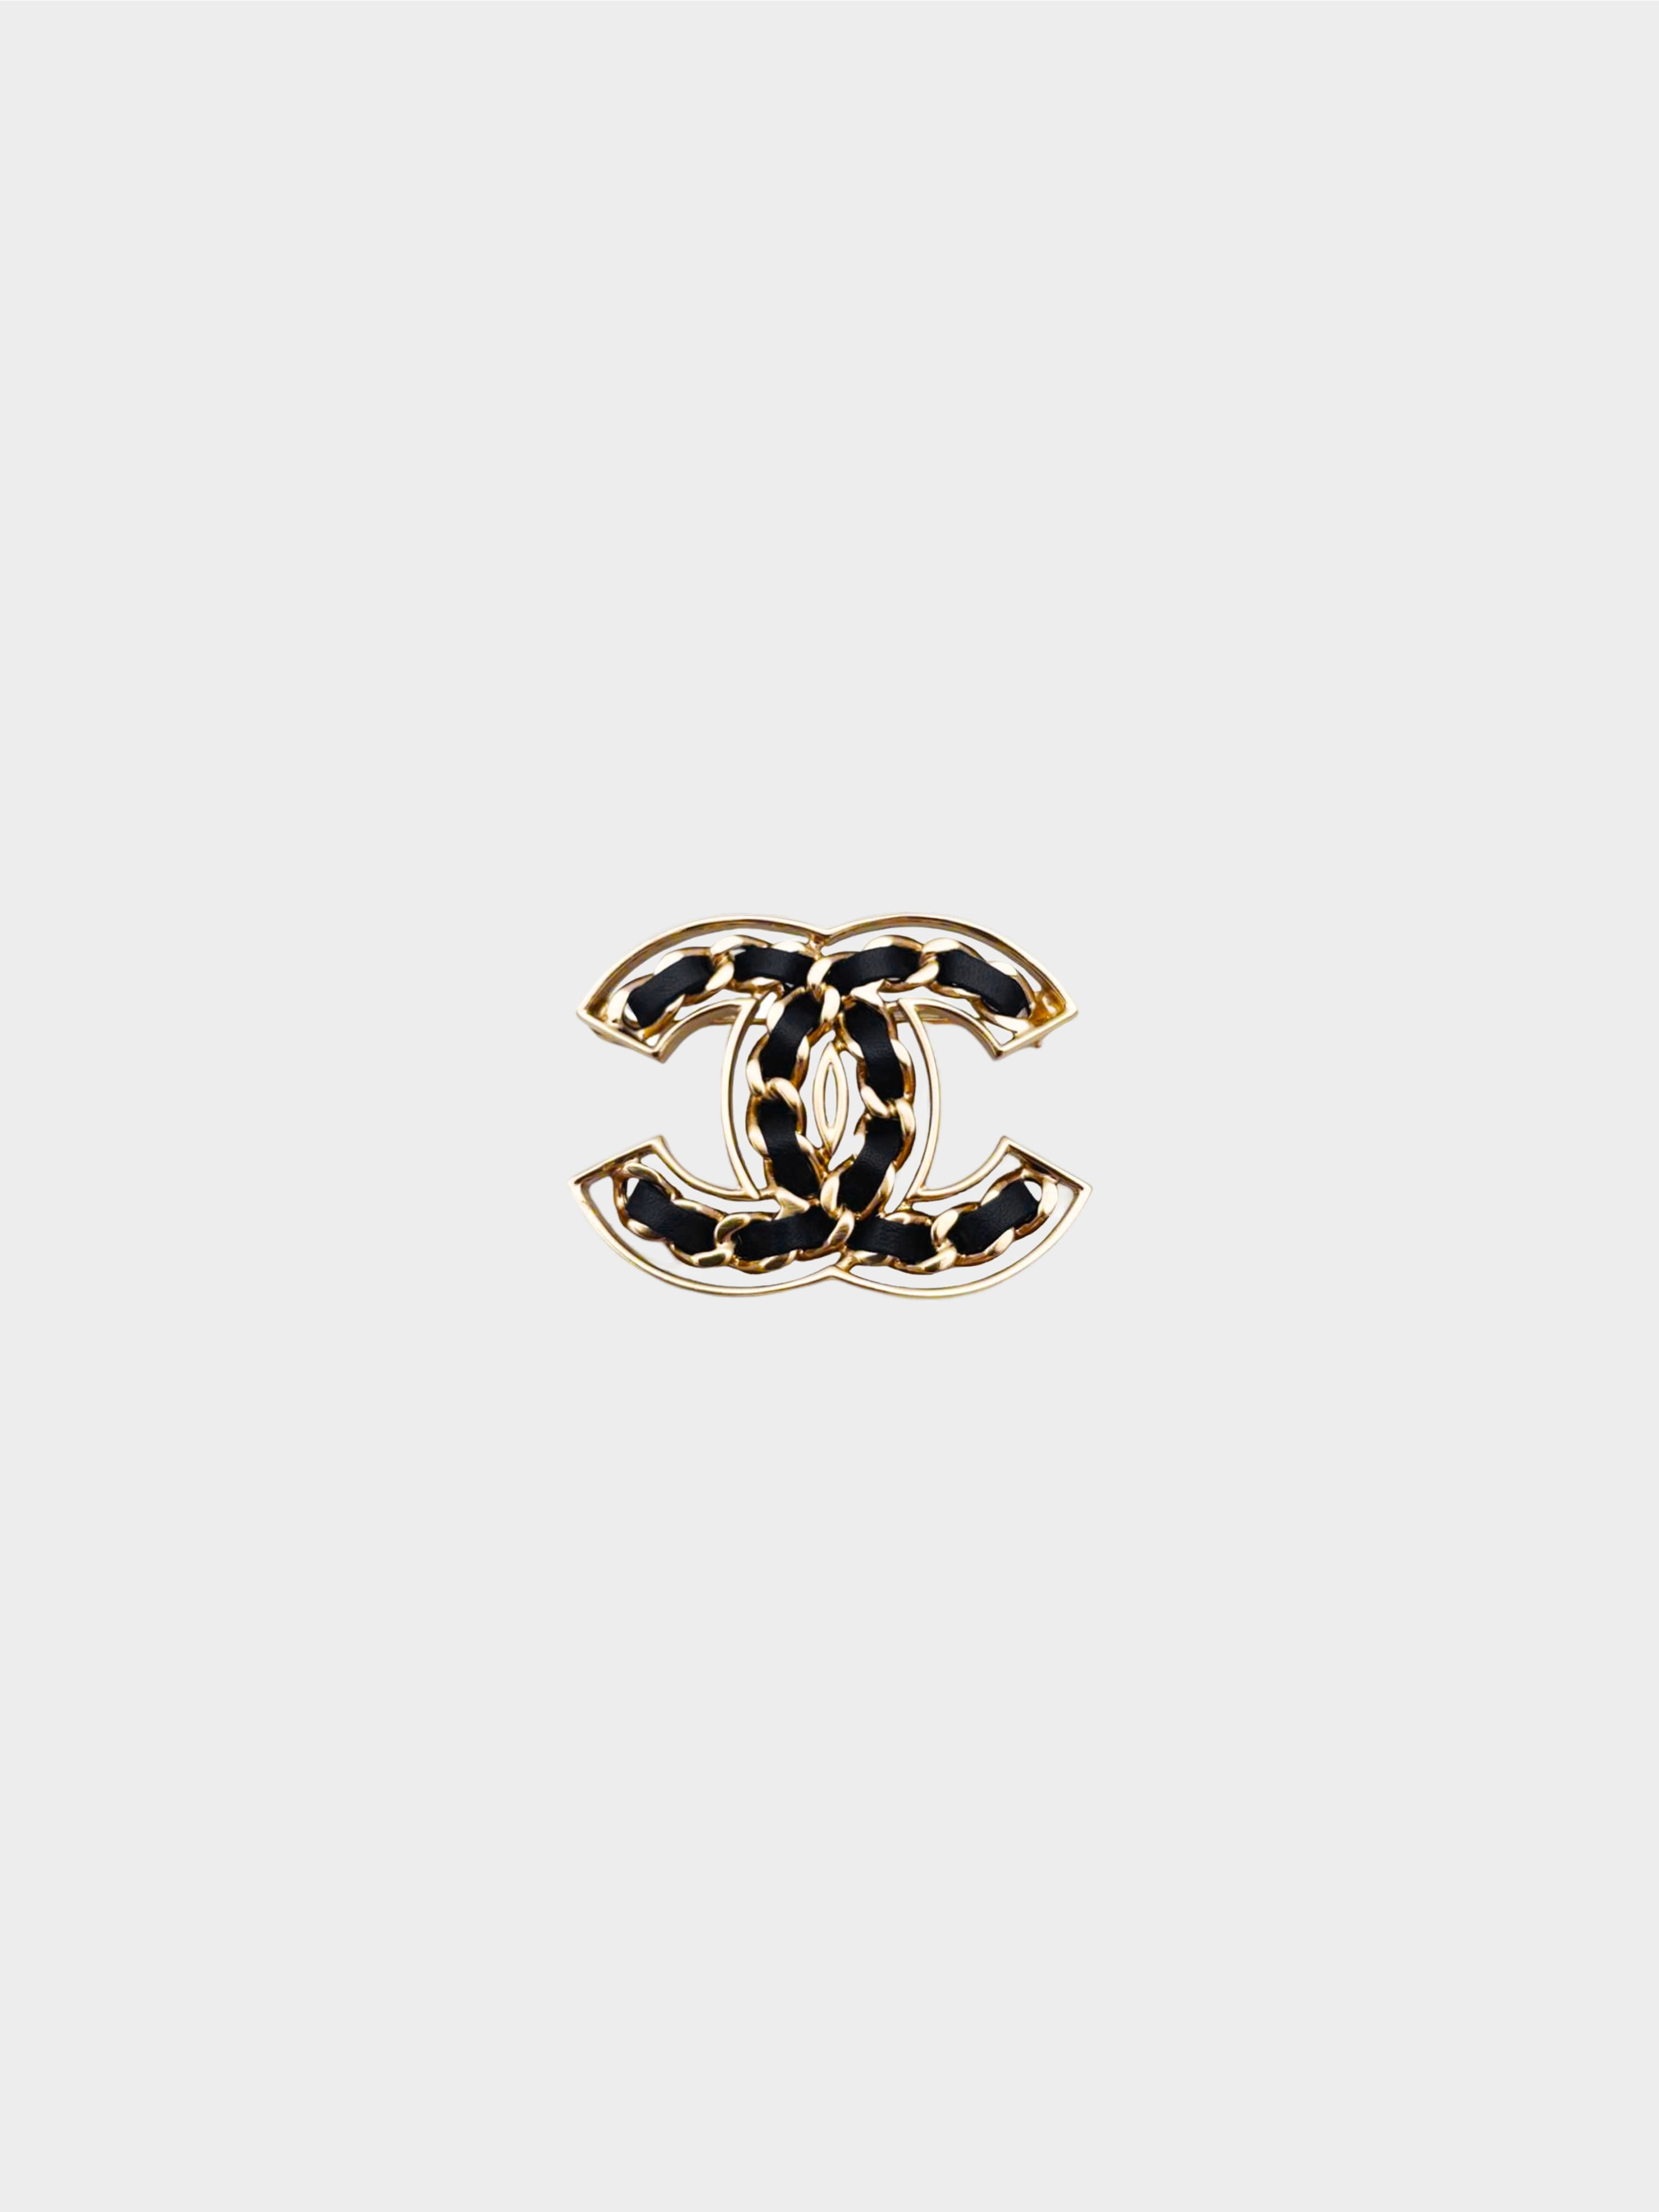 Chanel Spring 2019 Champagne Gold Lambskin CC Chain Brooch